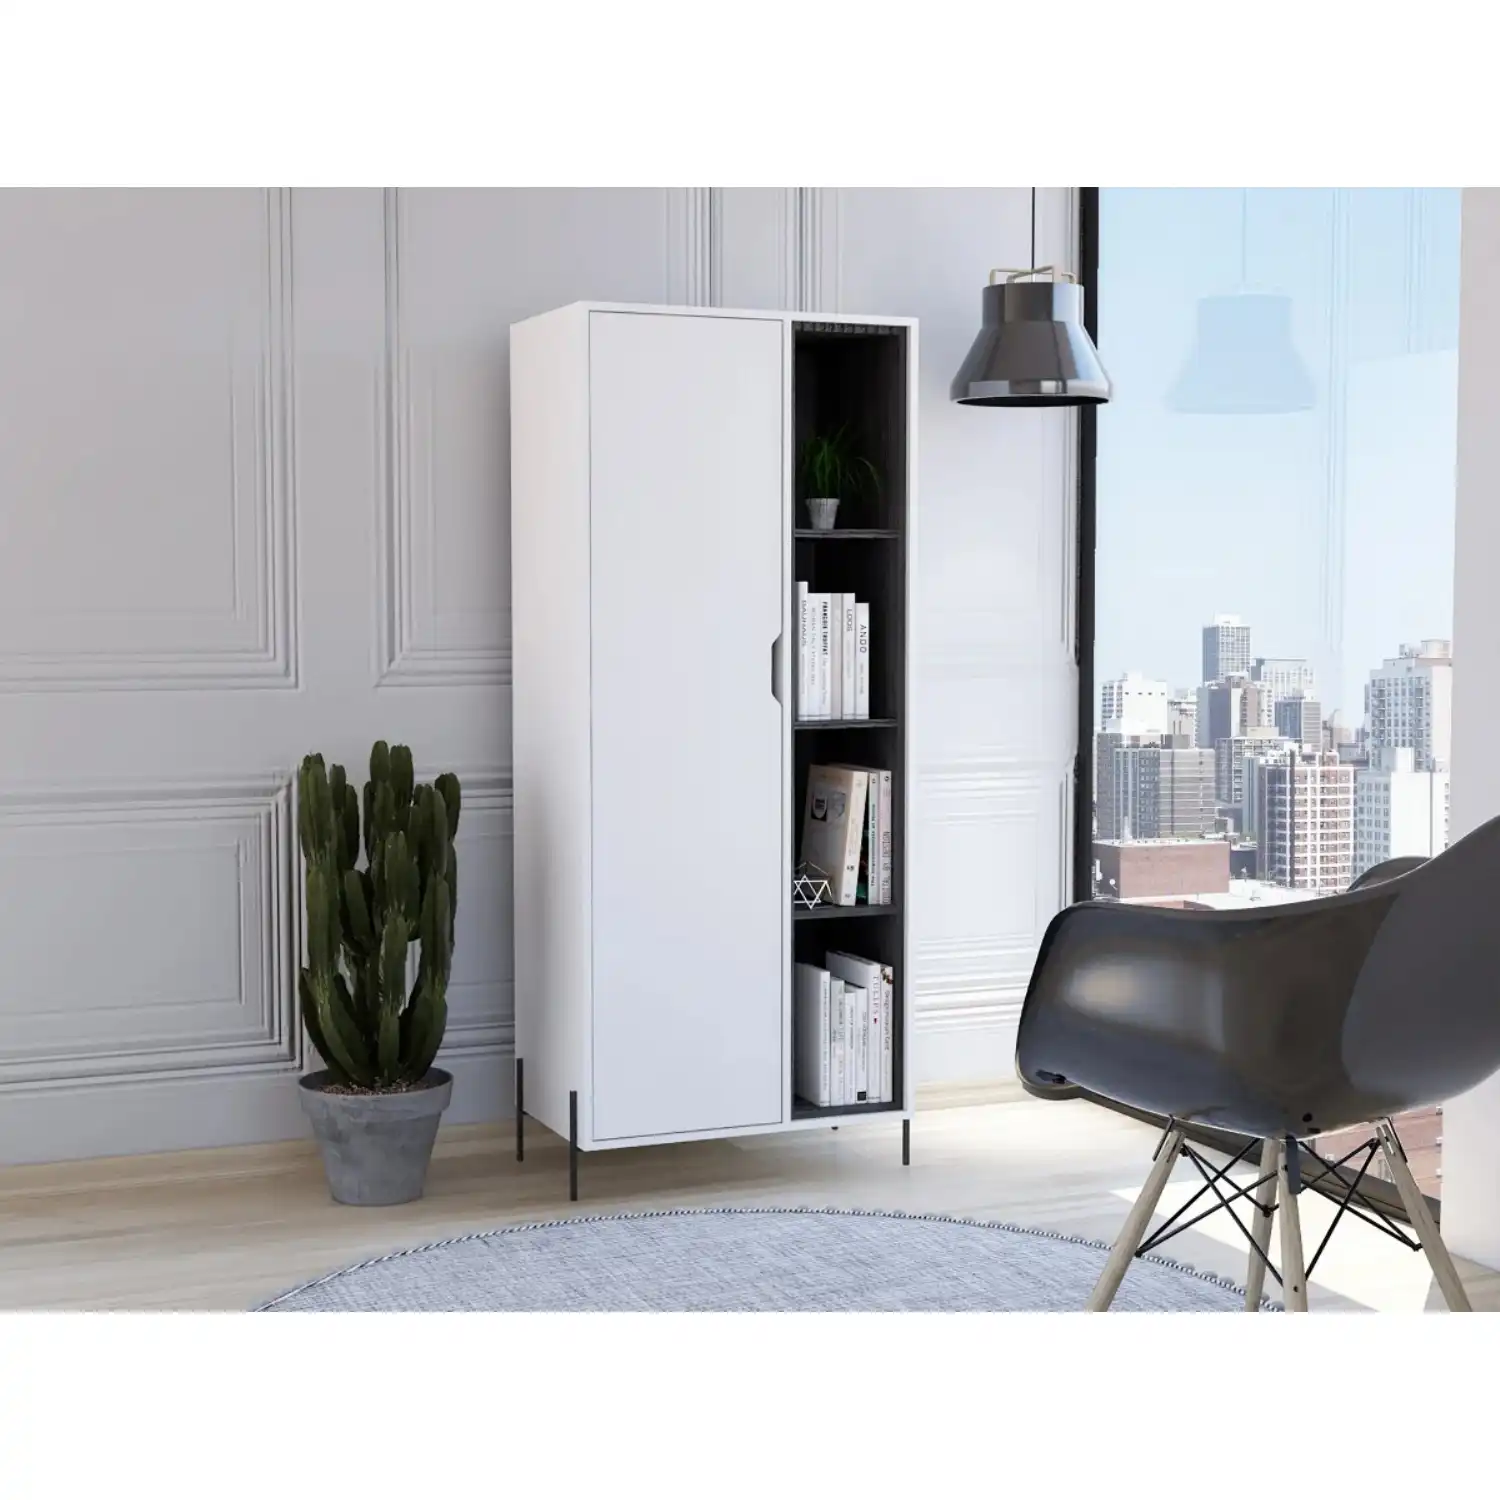 Core White And Carbon Grey Oak Effect 160cm Tall Bookcase Display Unit 1 Door